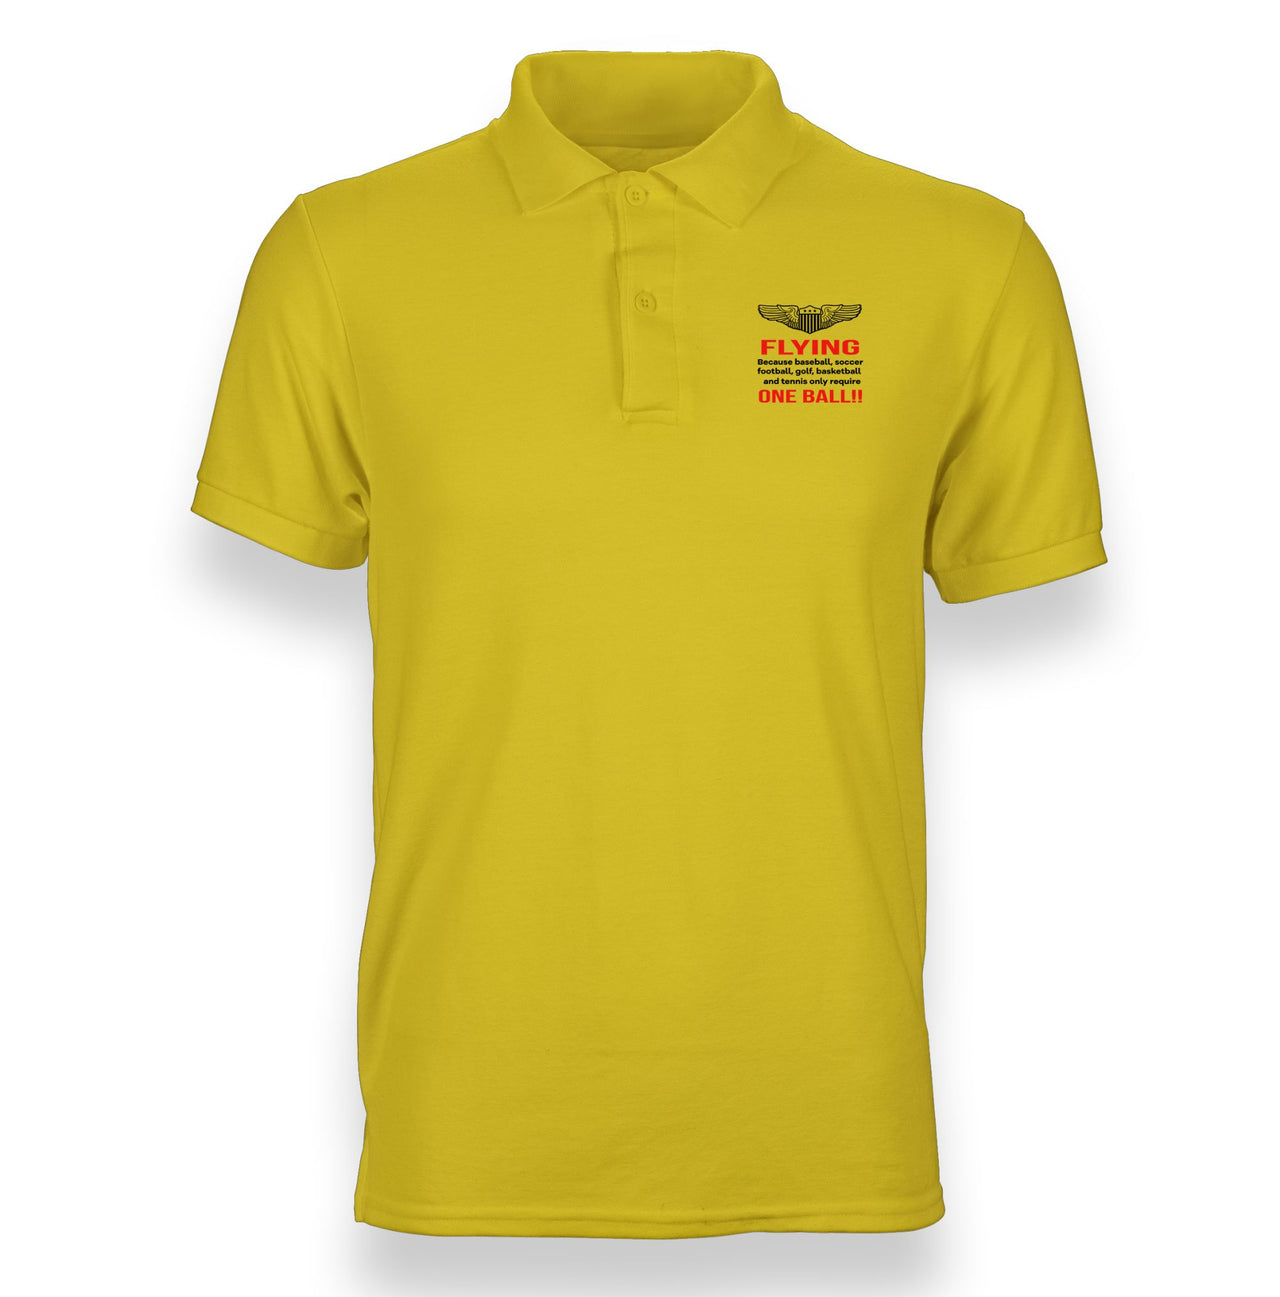 Flying One Ball Designed "WOMEN" Polo T-Shirts